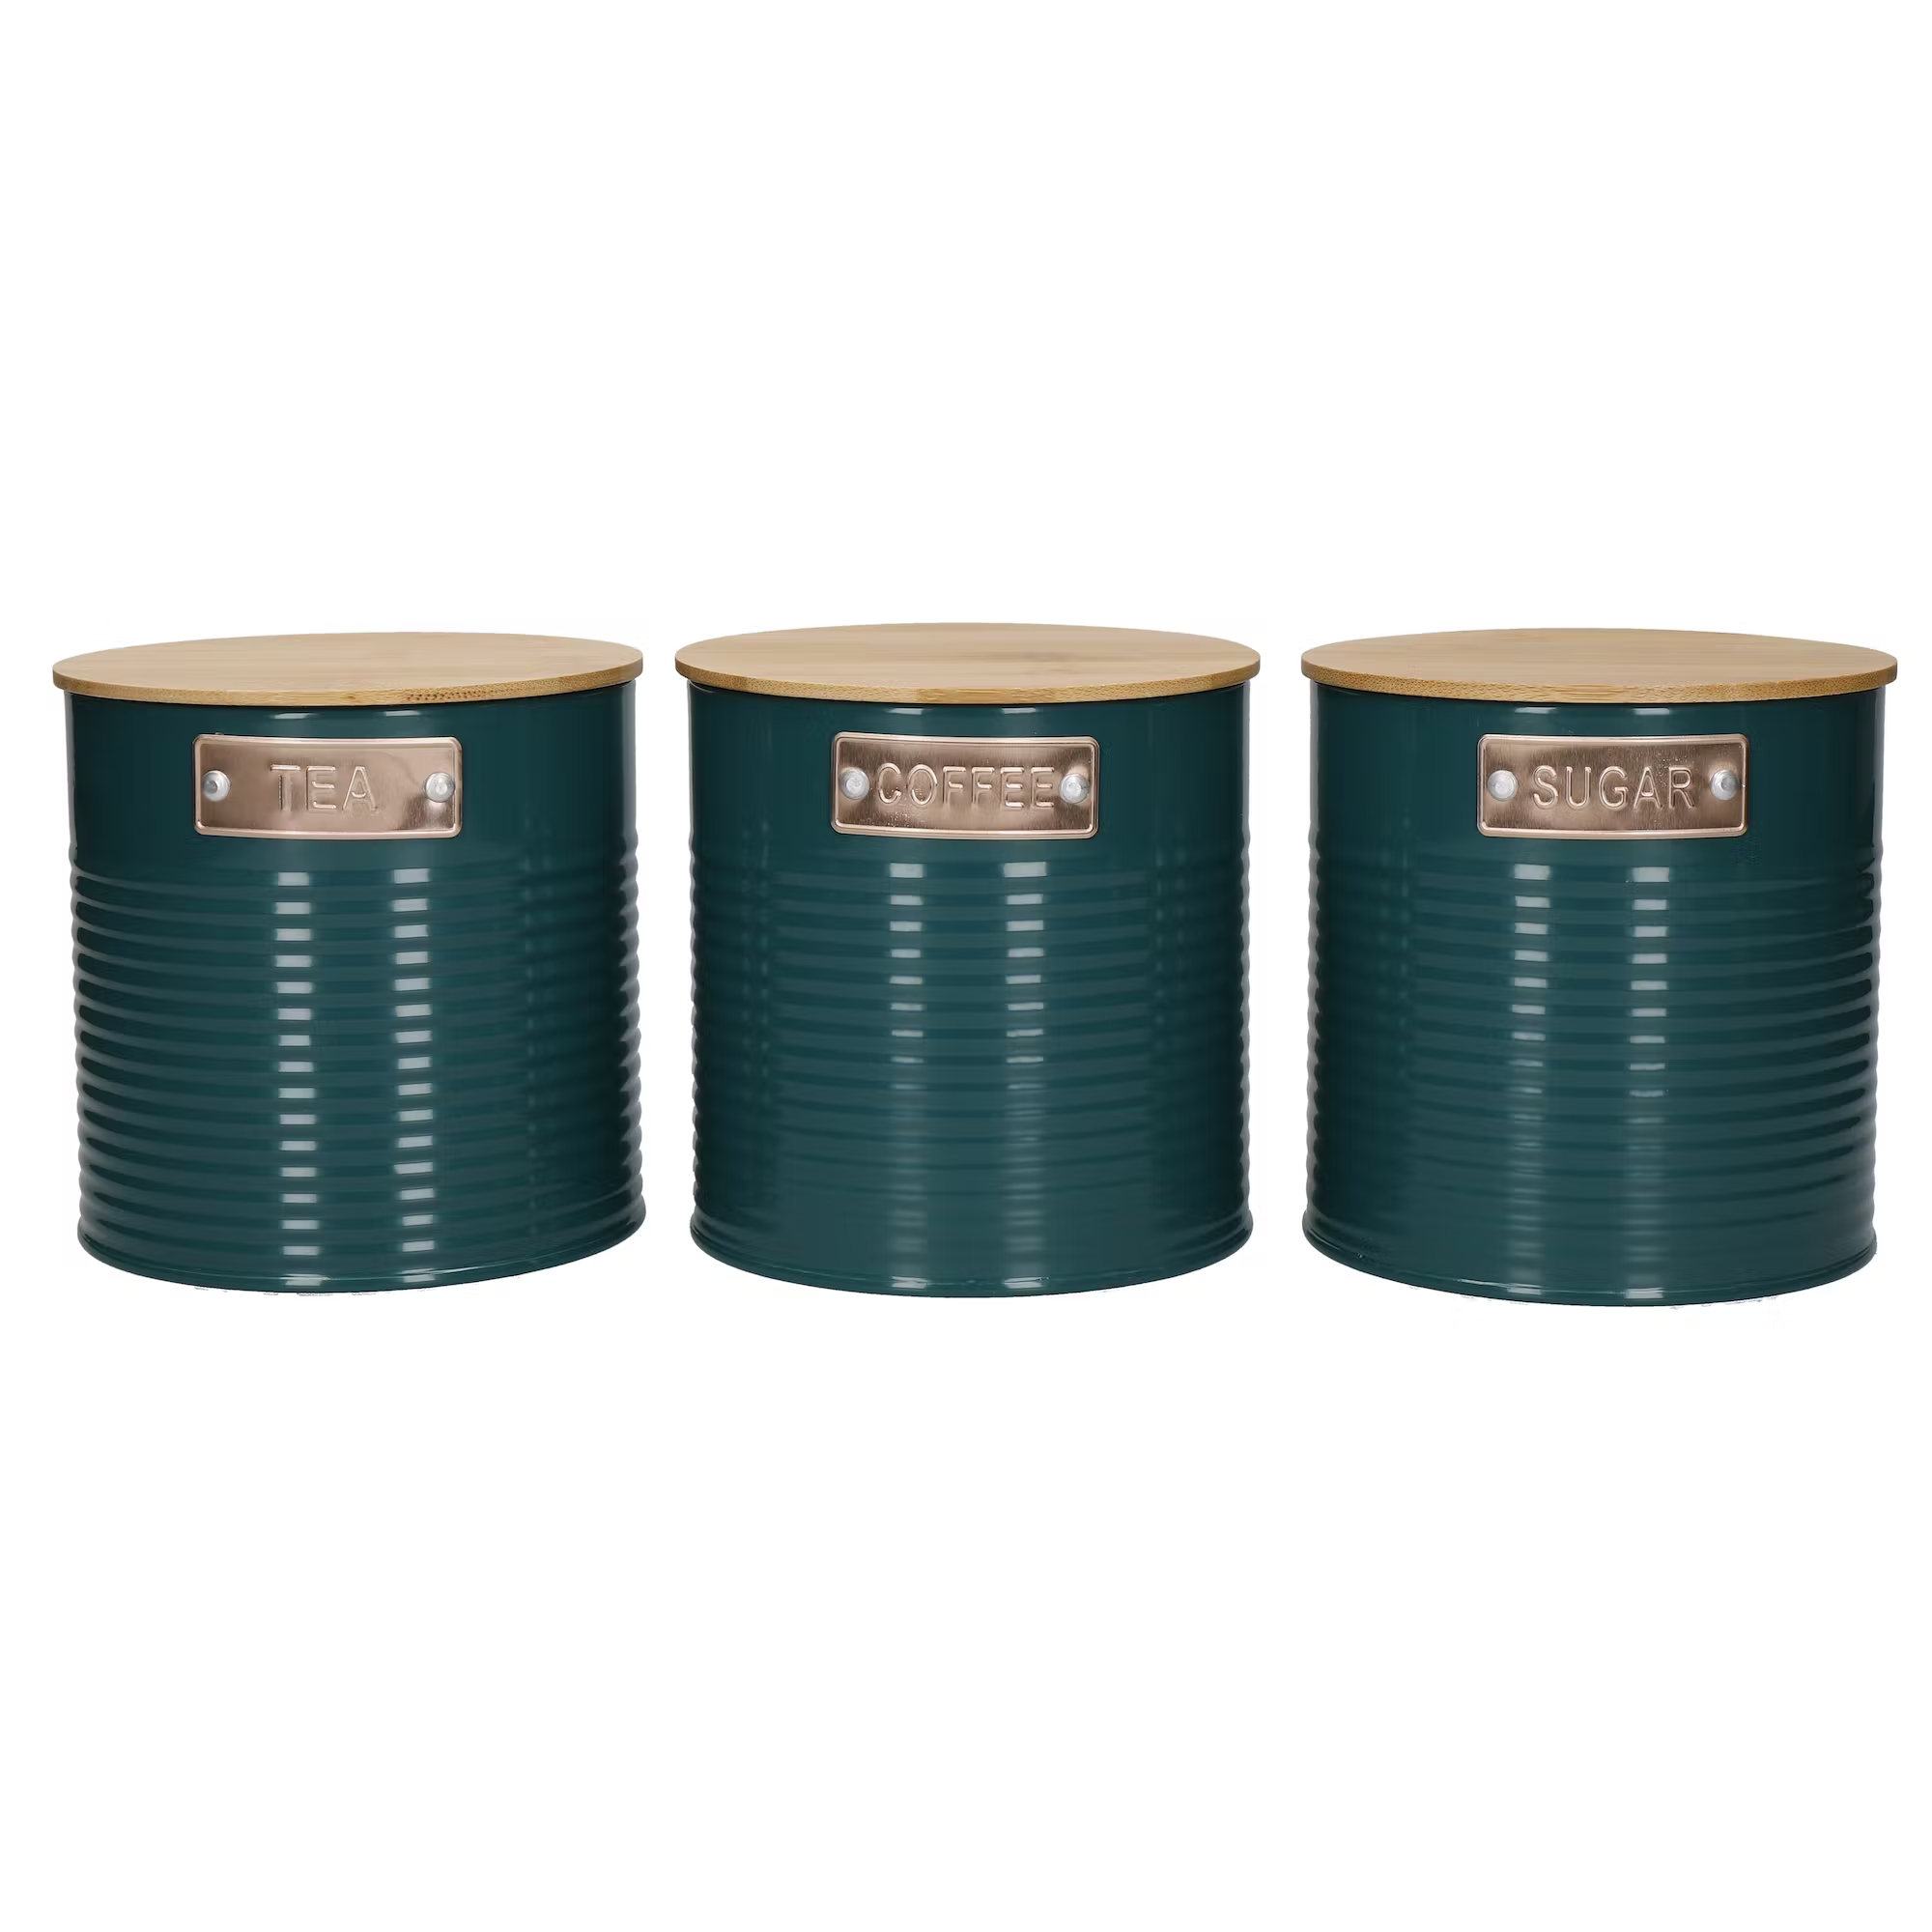 KitchenCraft Tea, Coffee and Sugar Storage Canisters Set of 3 - Teal - Kate's Cupboard